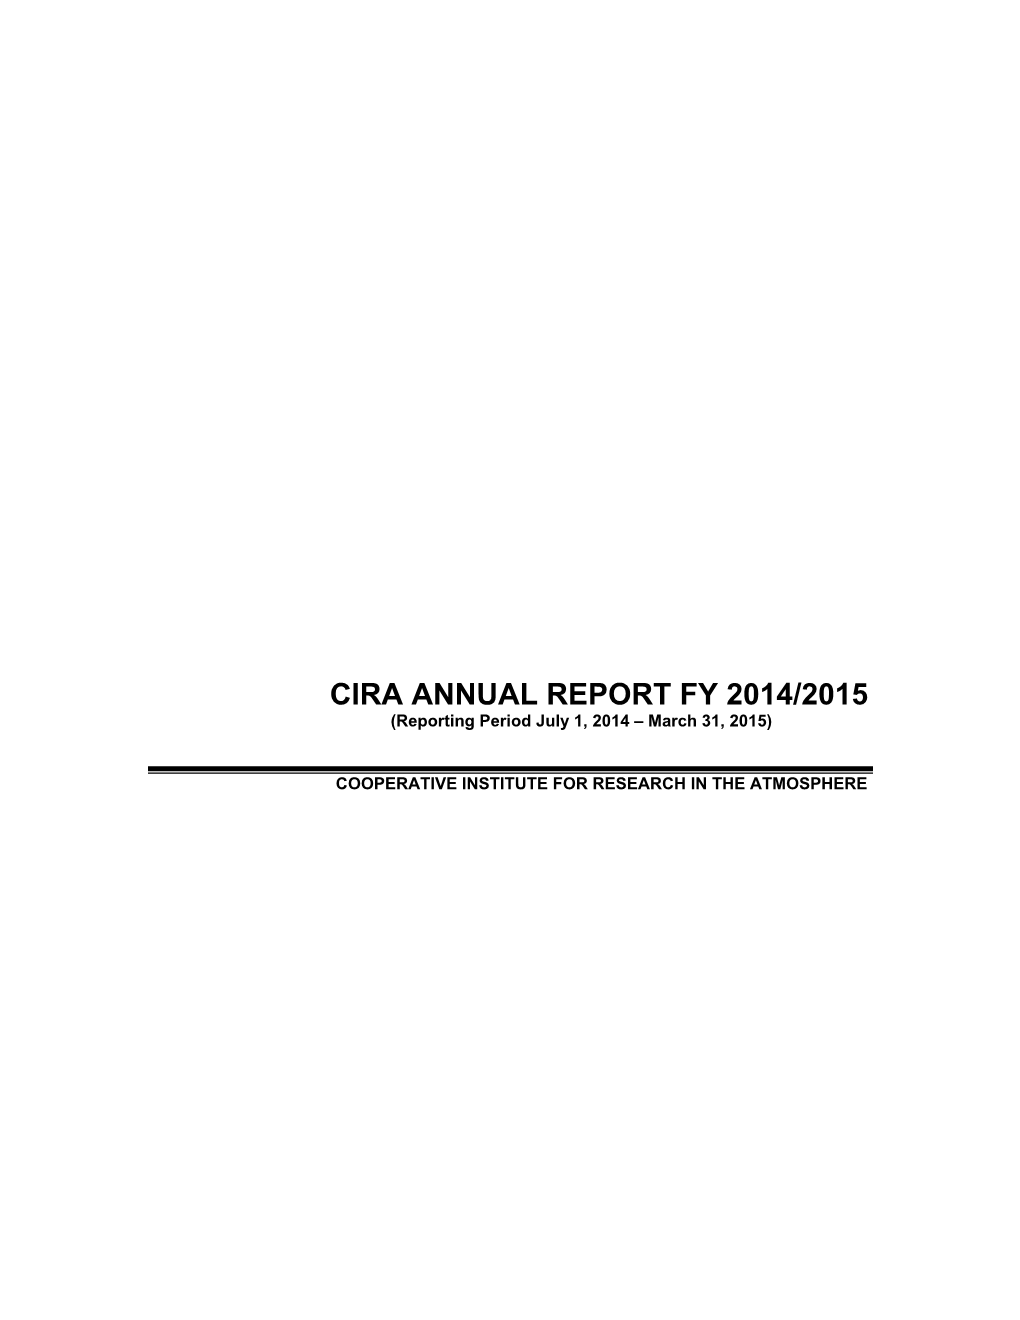 CIRA ANNUAL REPORT FY 2014/2015 (Reporting Period July 1, 2014 – March 31, 2015)